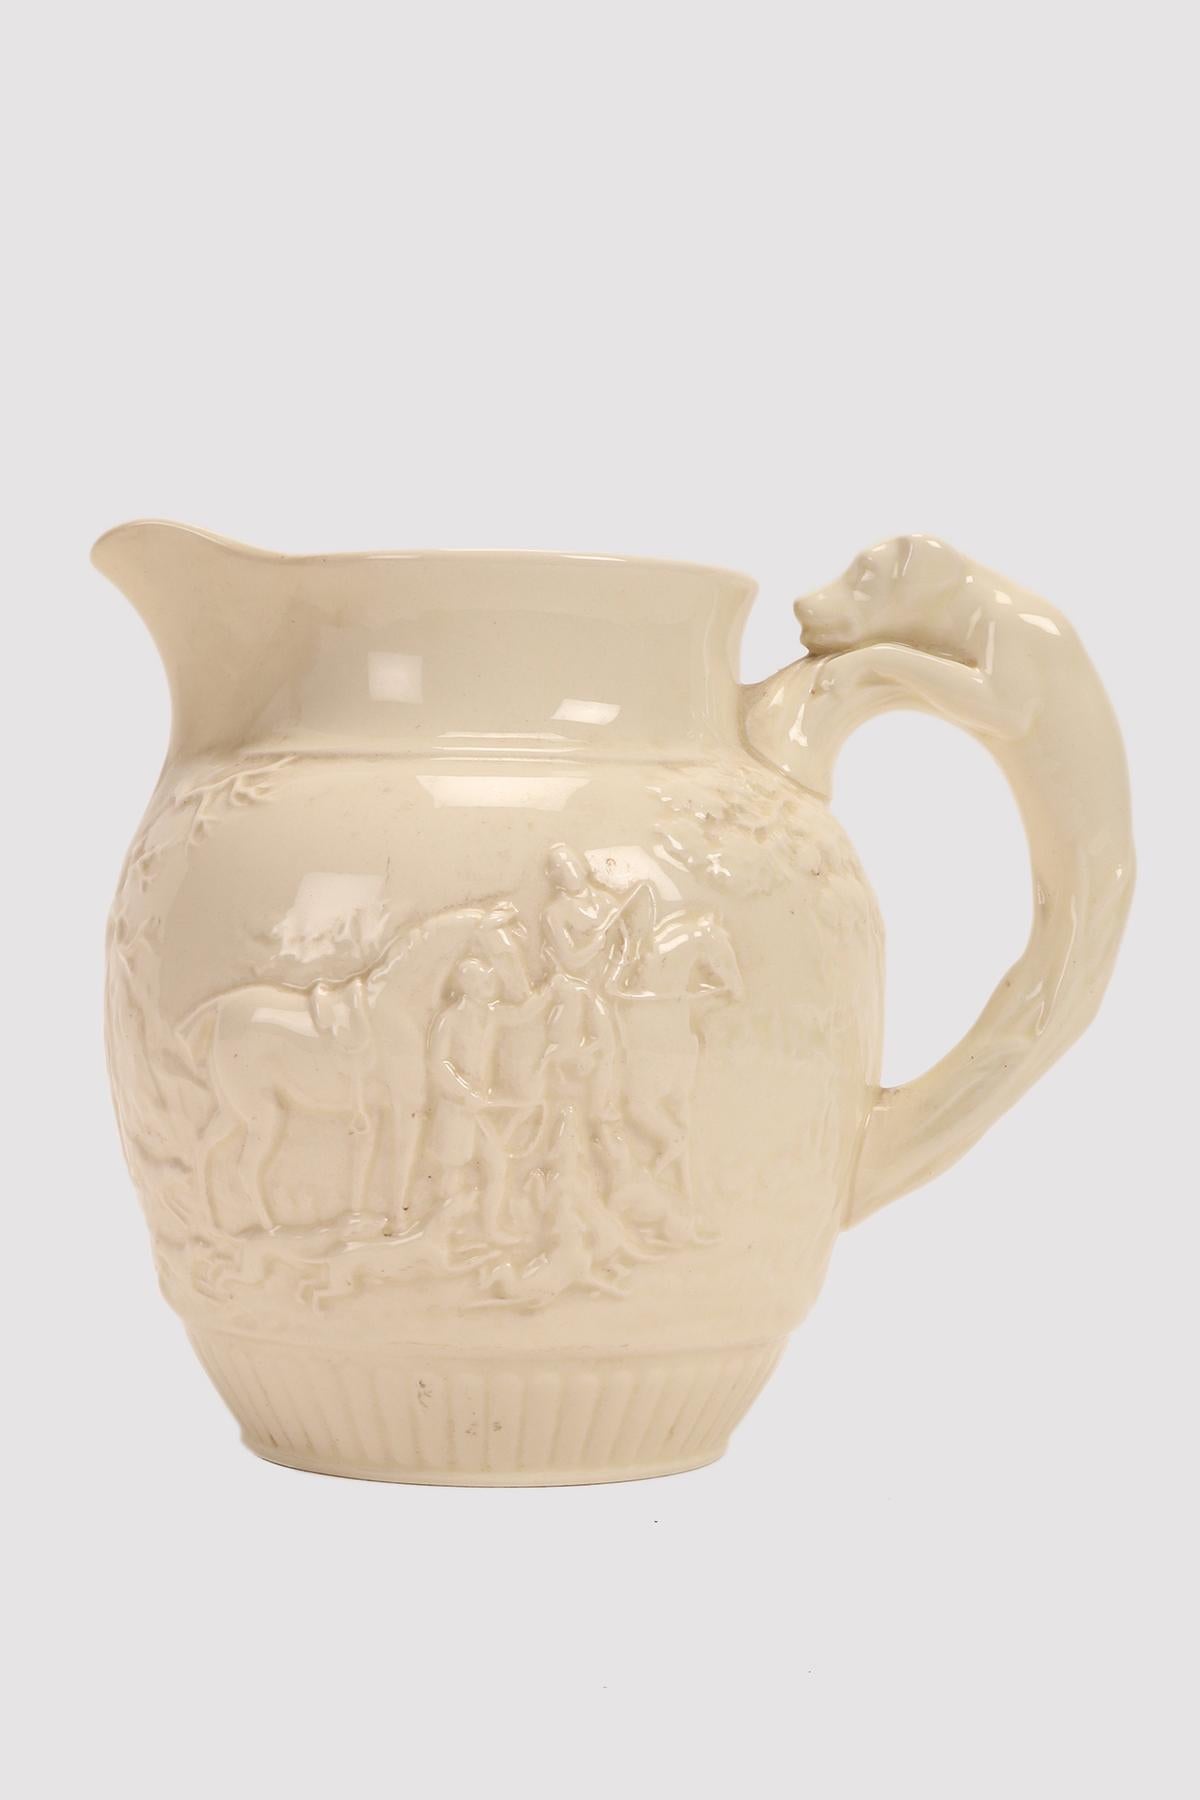 The jug is made of fine pottery with a cream colored glaze cover. The flared body shows elements in relief in the first elevation. Then a central band with a fox hunting scene with trees and a gate in low relief. The rim is distinct, flared, with an